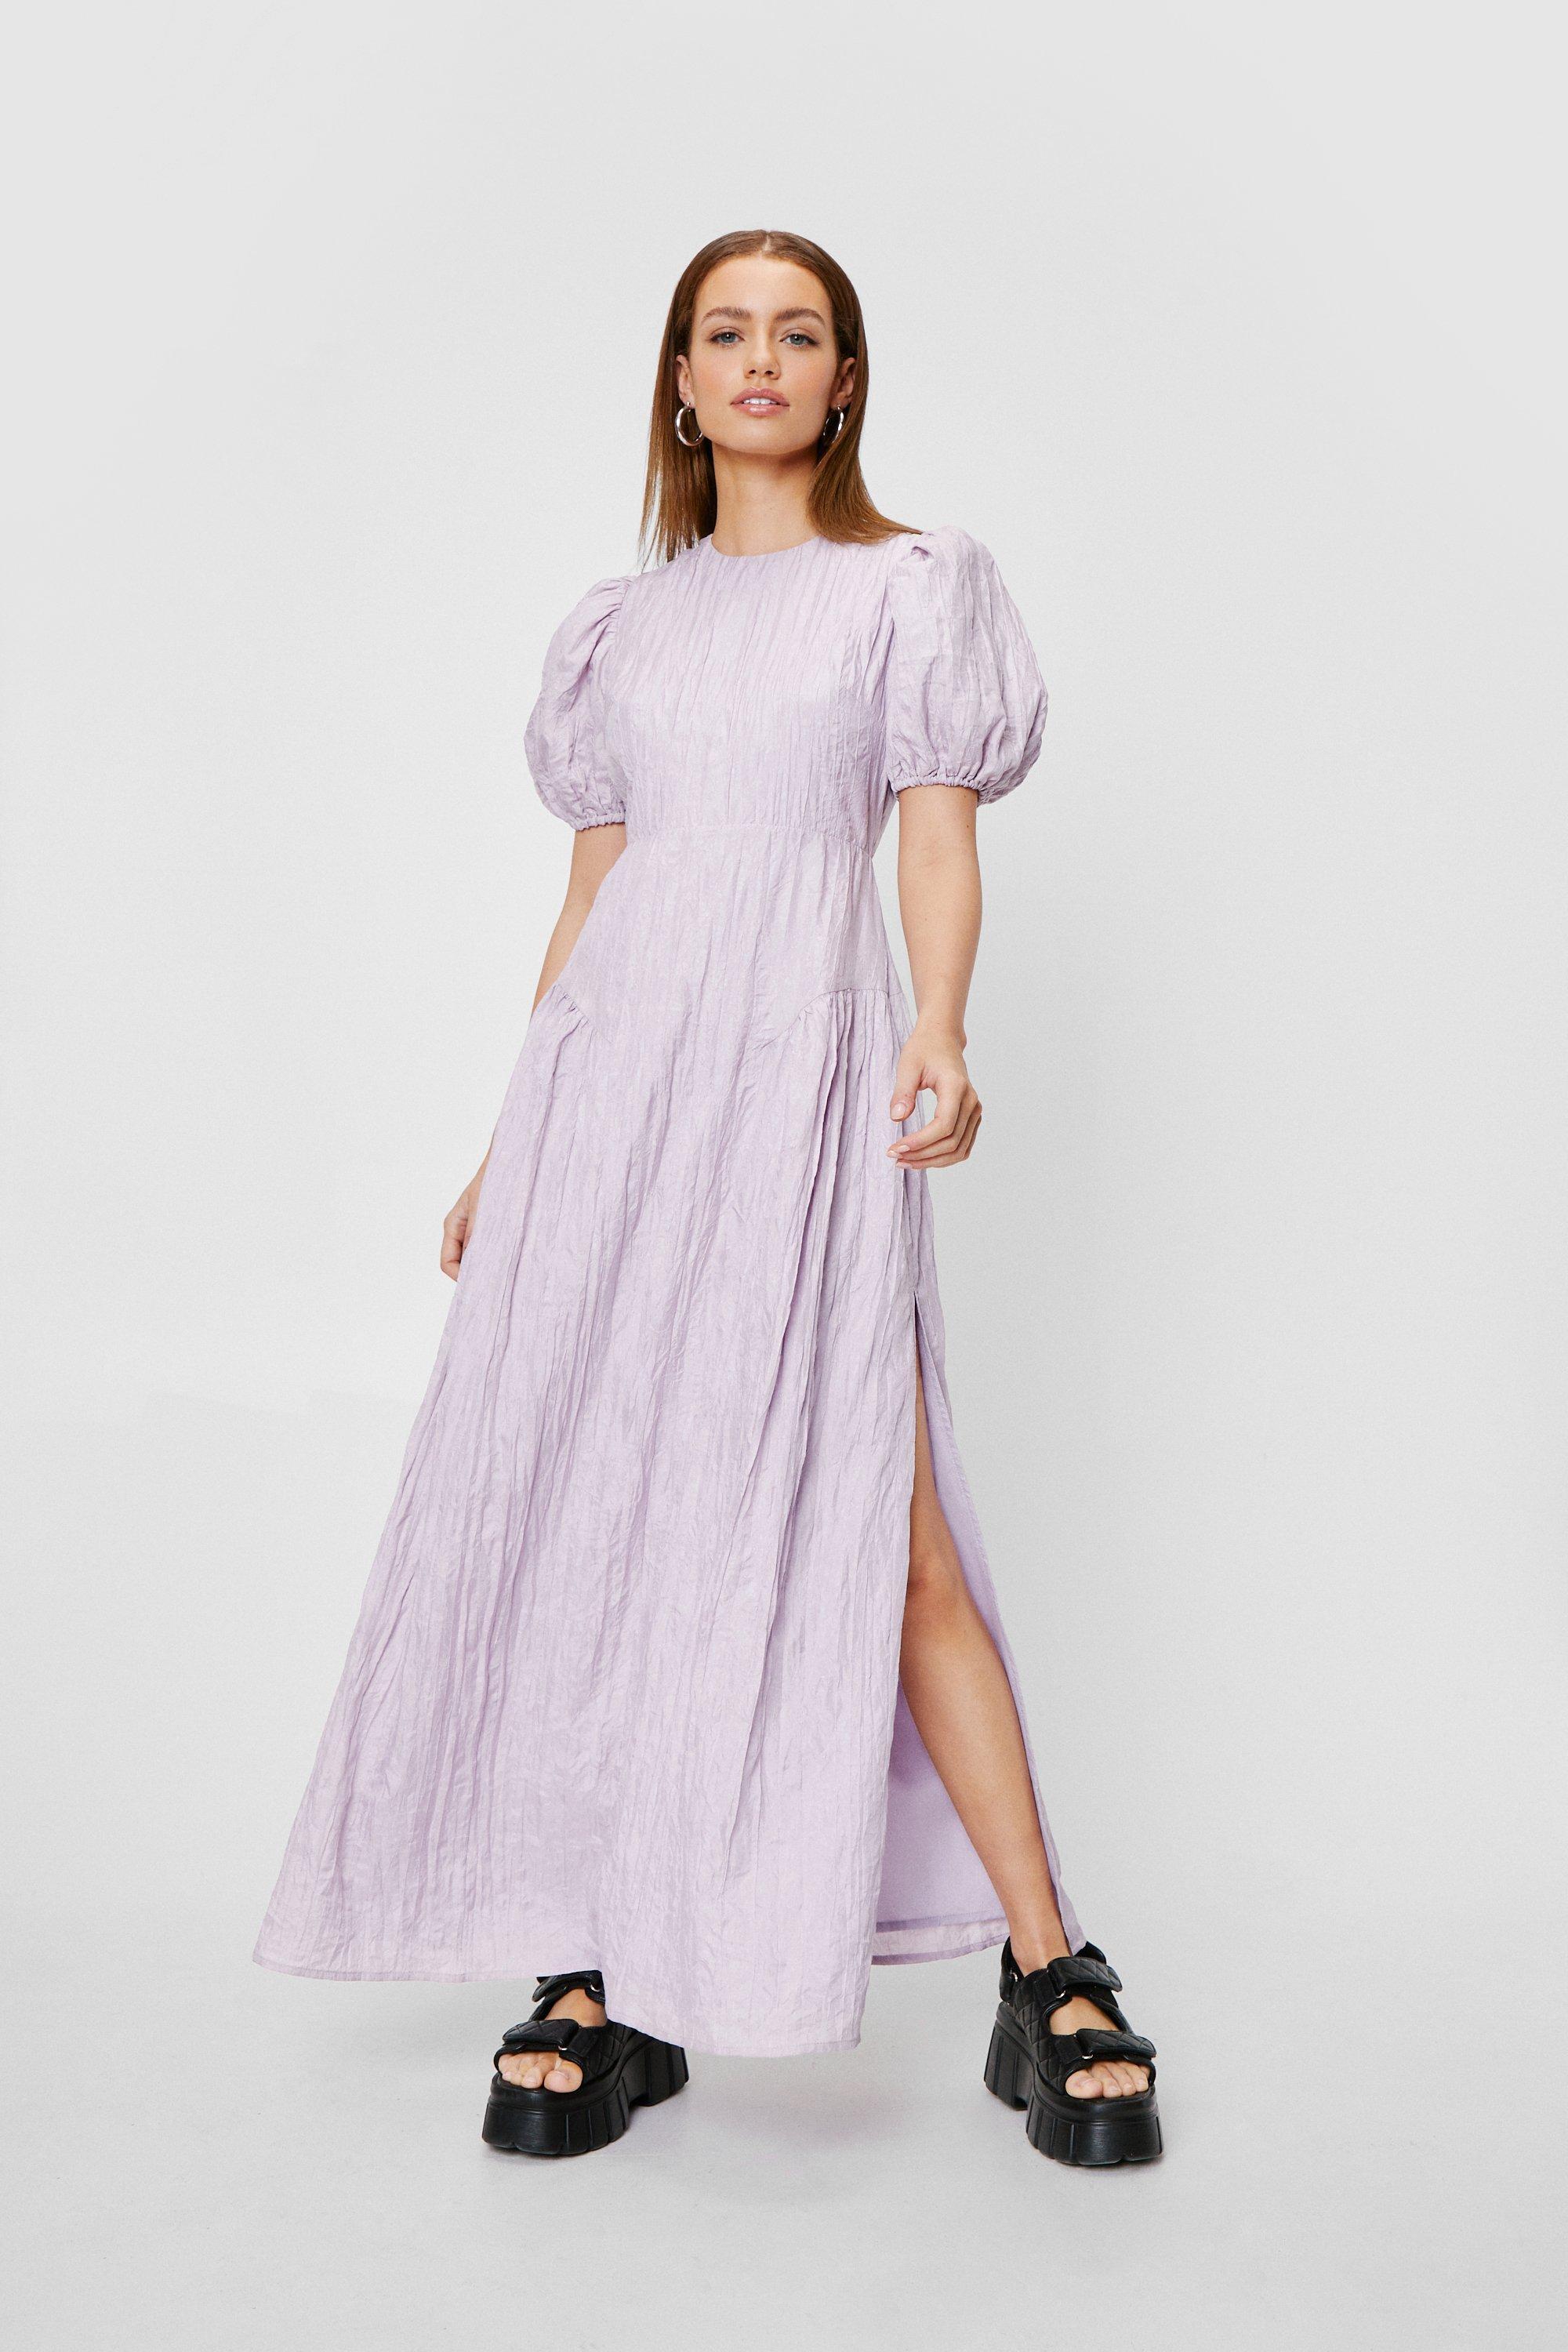 Nasty Gal Synthetic Petite Puff Sleeve Slit Maxi Dress in Purple - Lyst